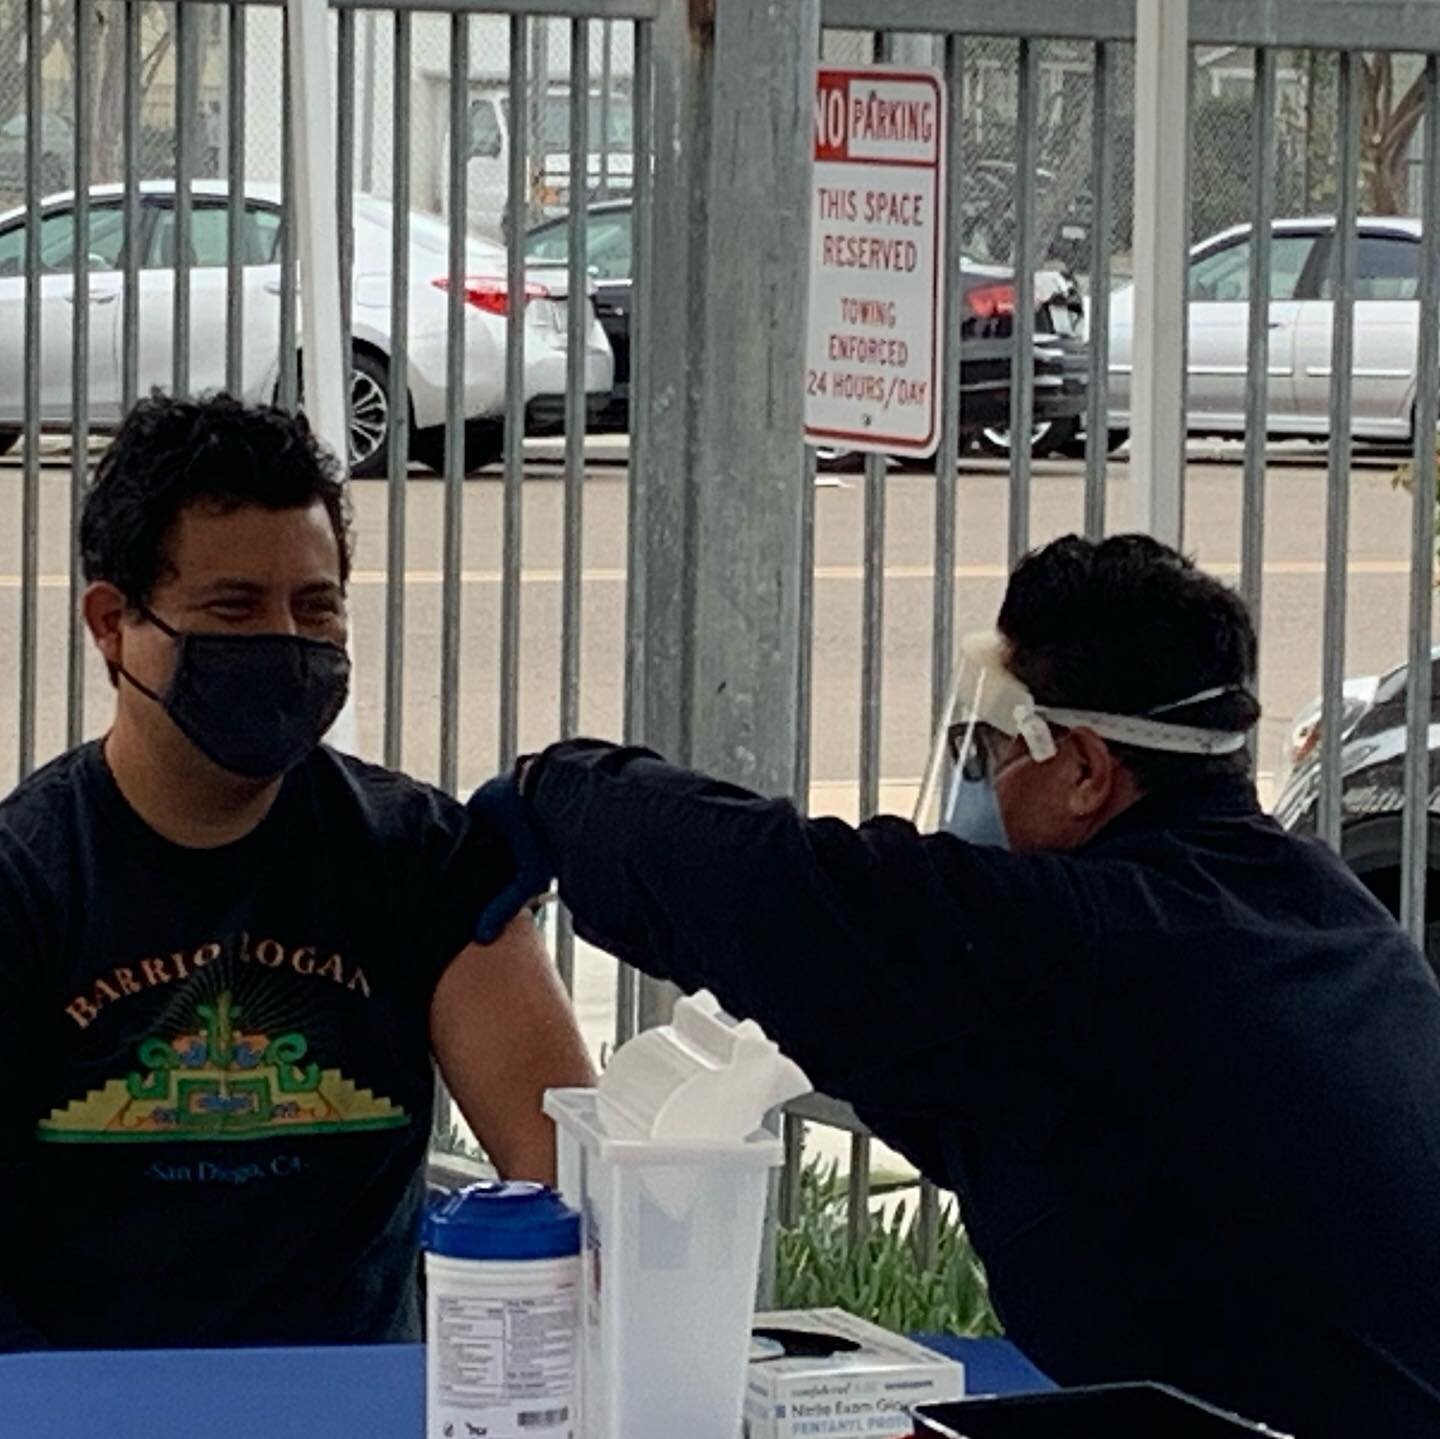 Rain or shine - here we are. Free flu vaccines until 3pm. Stay healthy! #shermanheightscommunitycenter  #healthy #flu